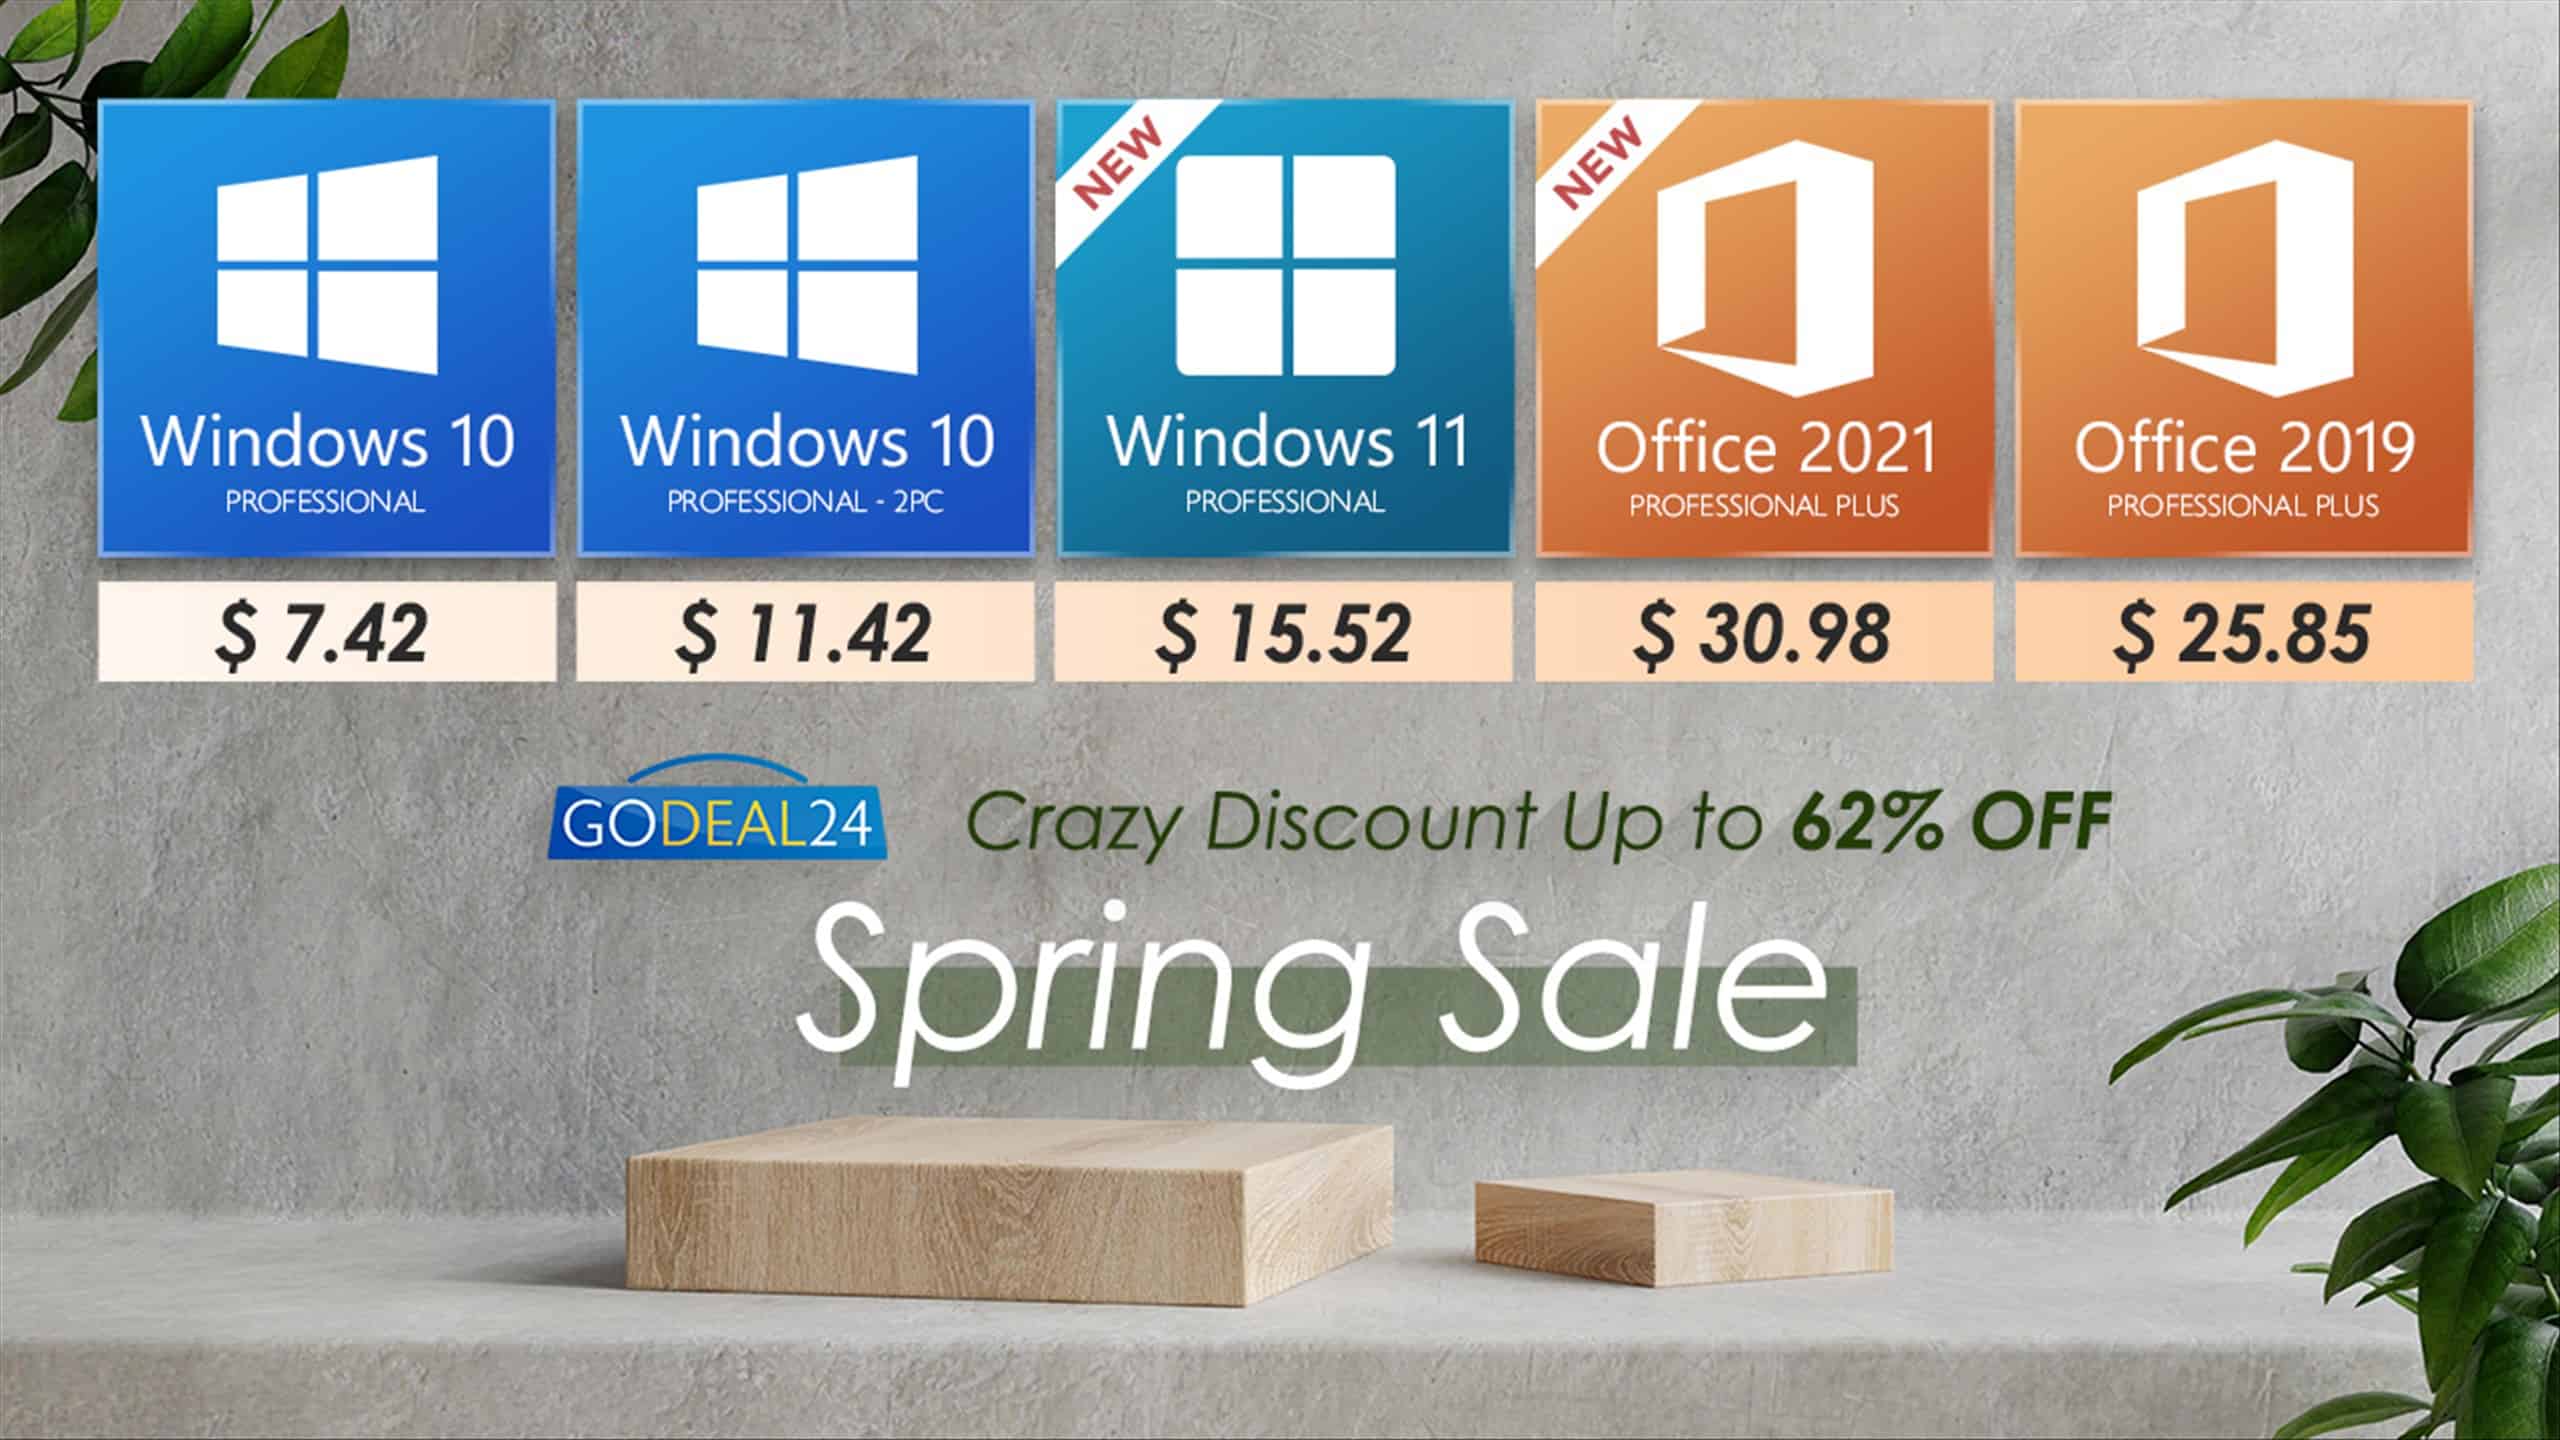 Where can you buy genuine Microsoft Office 2021 for only $30.98? Come to Godeal24’s Spring Sale!